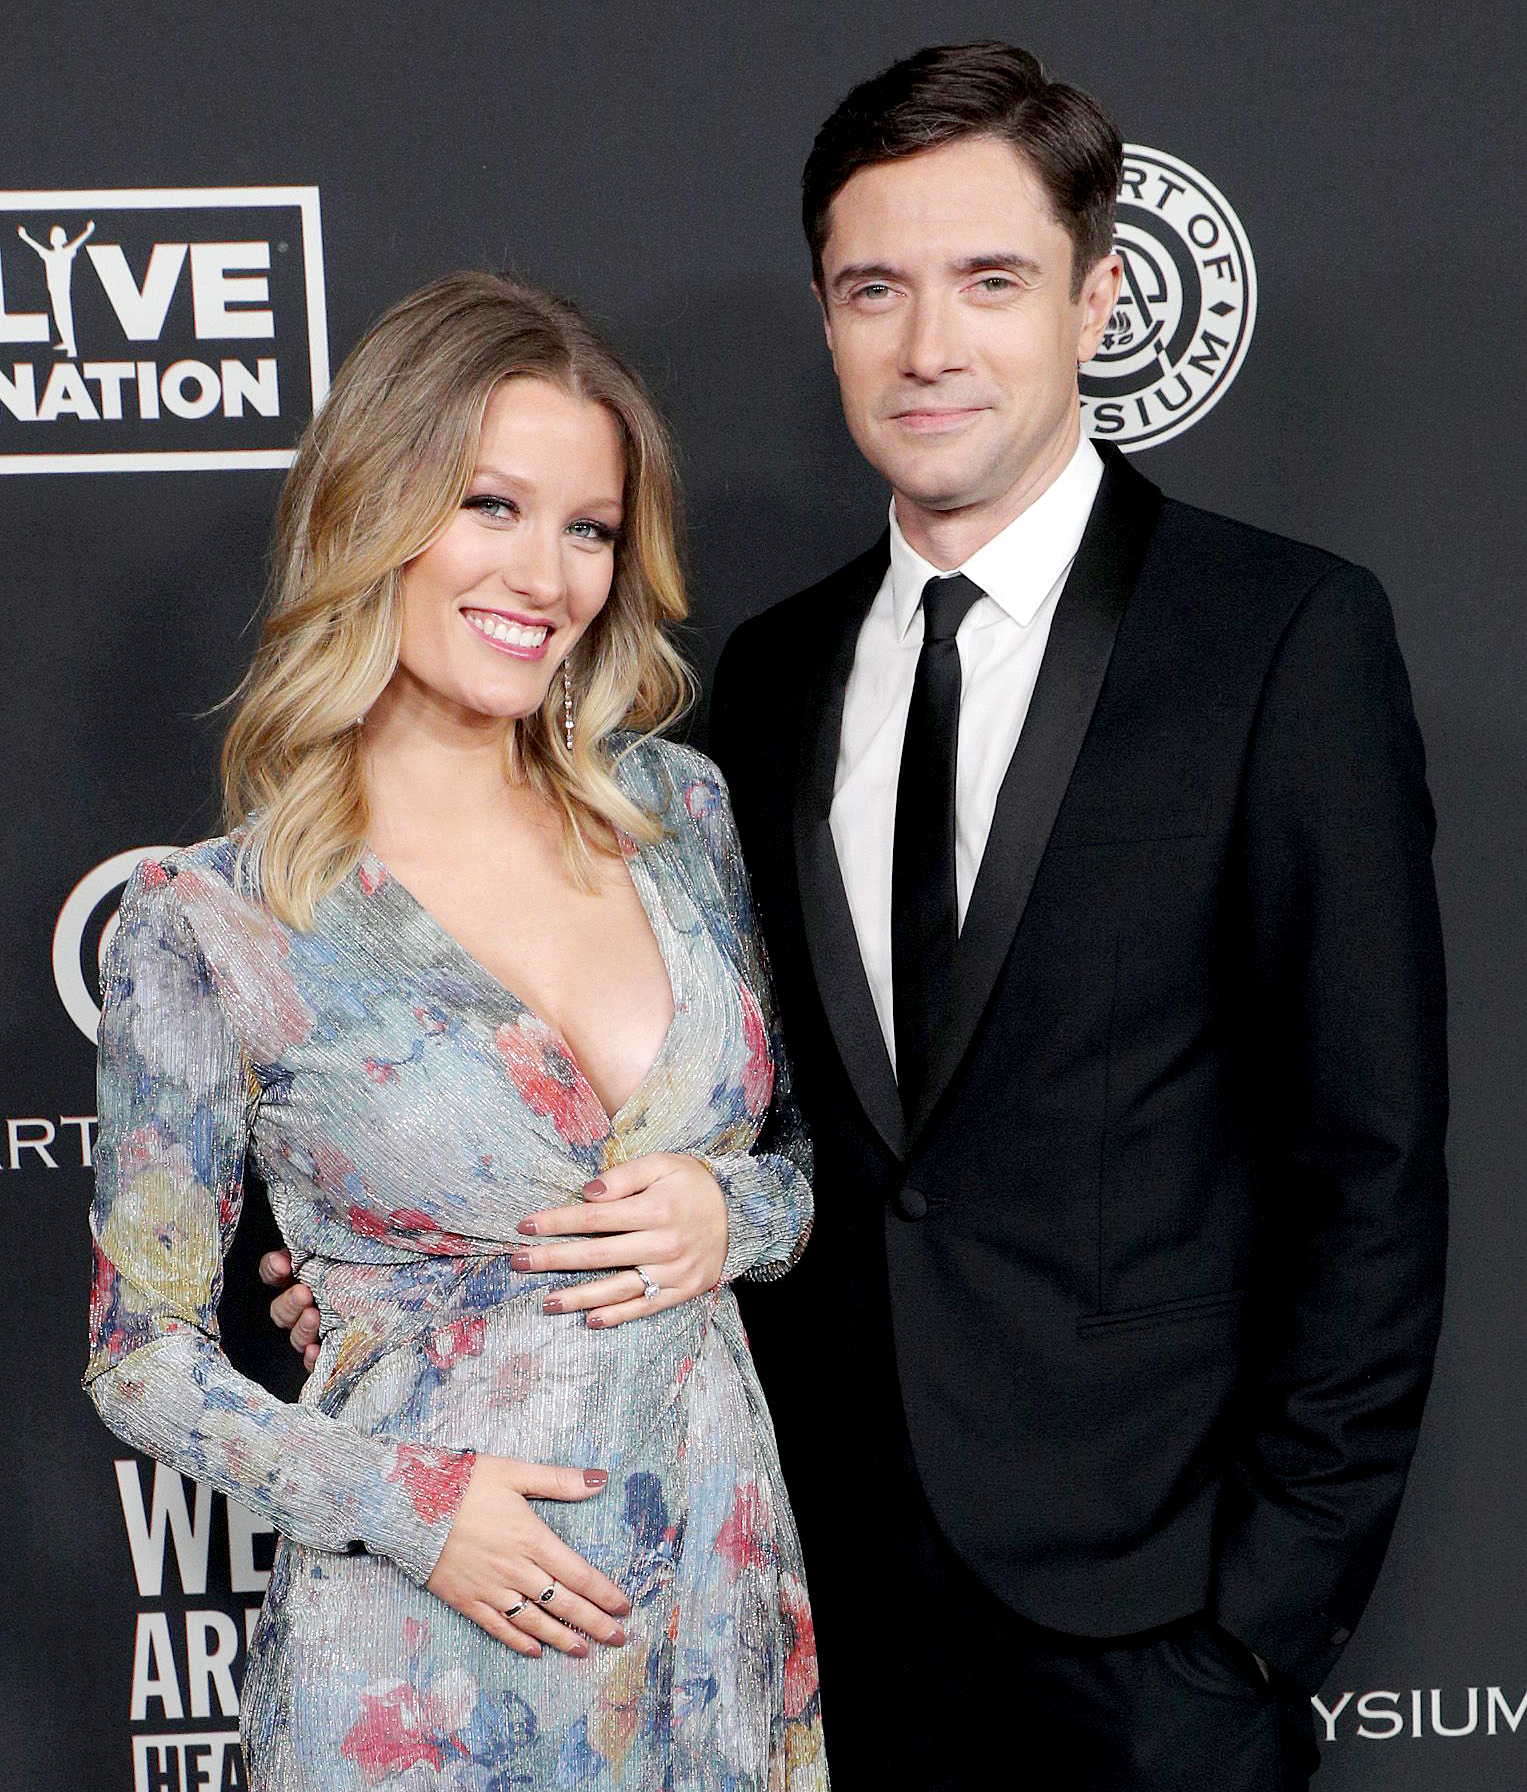 2020 Celebrity Pregnancy Announcements: Which Stars Are Expecting